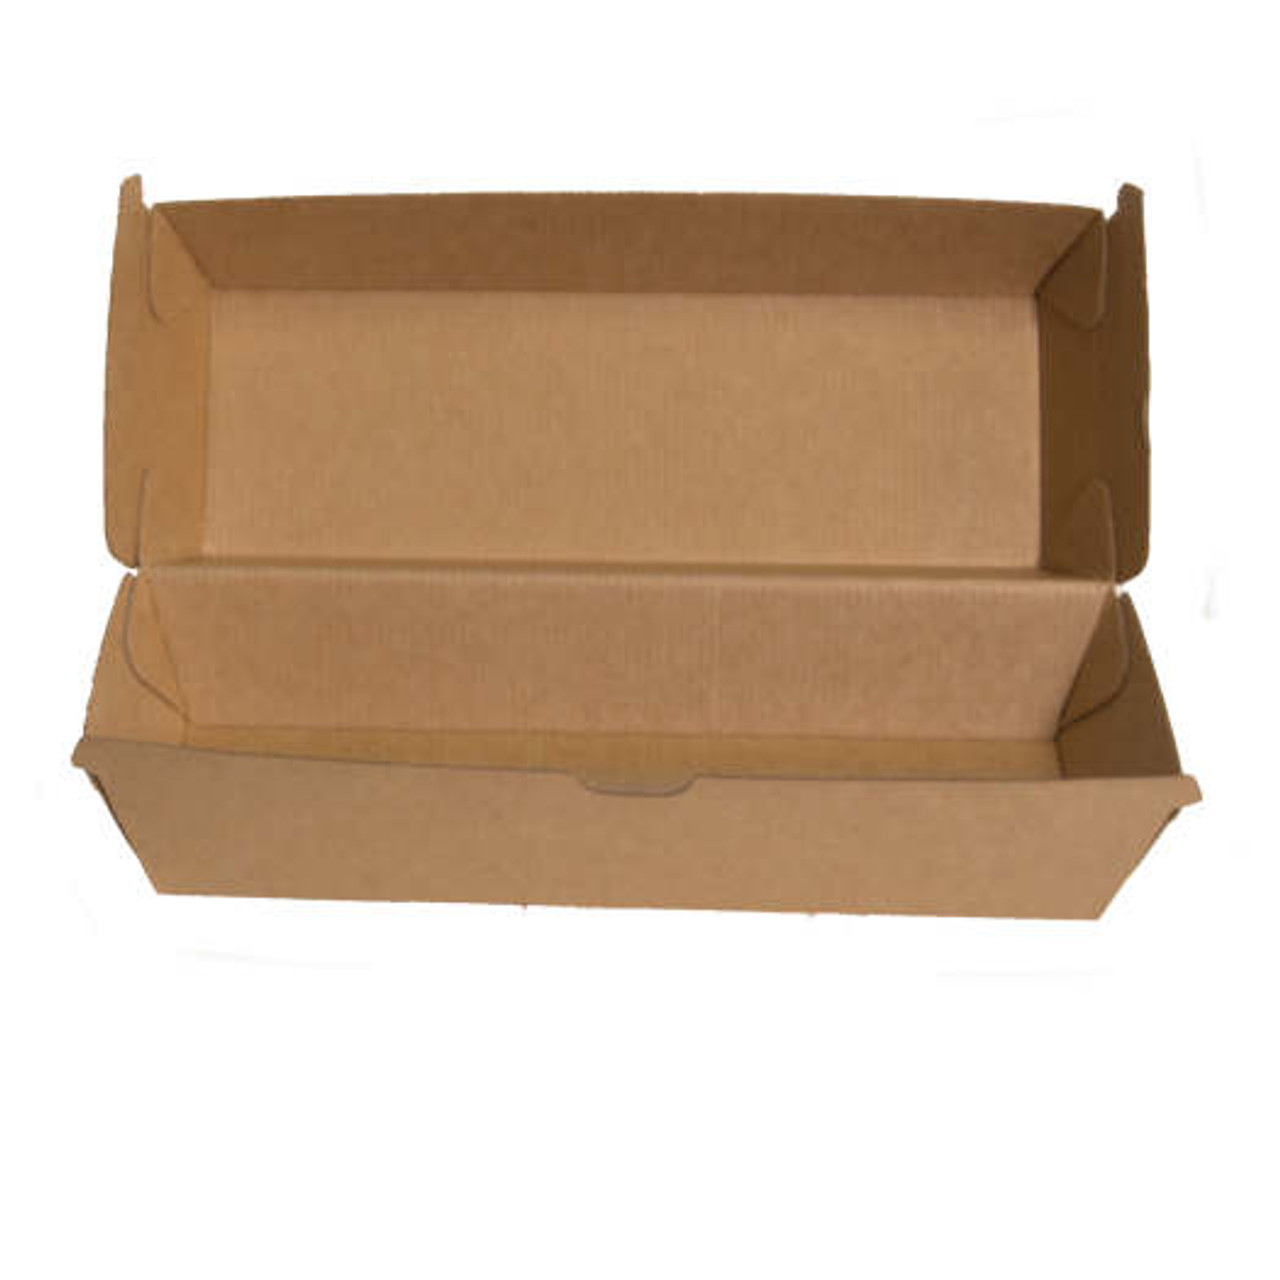 Pack x 100 Cardboard 9" Baguette & Bakery Boxes 235 x 100 x 80mm